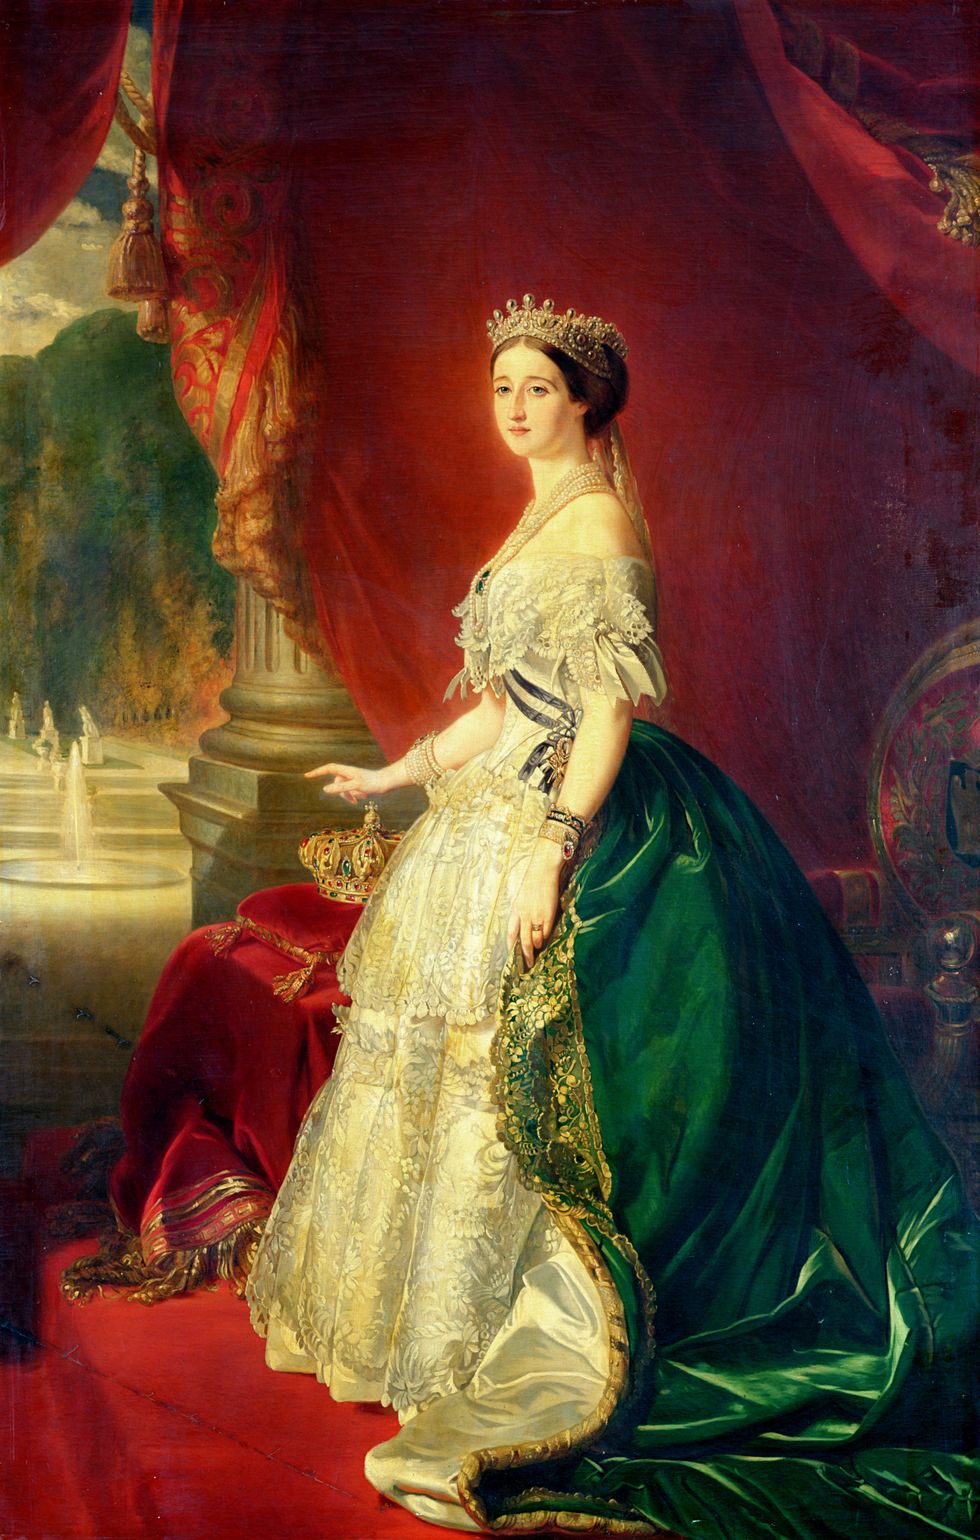 empress eugenie of france, wife of napoleon bonaparte iii photo by art images via getty images